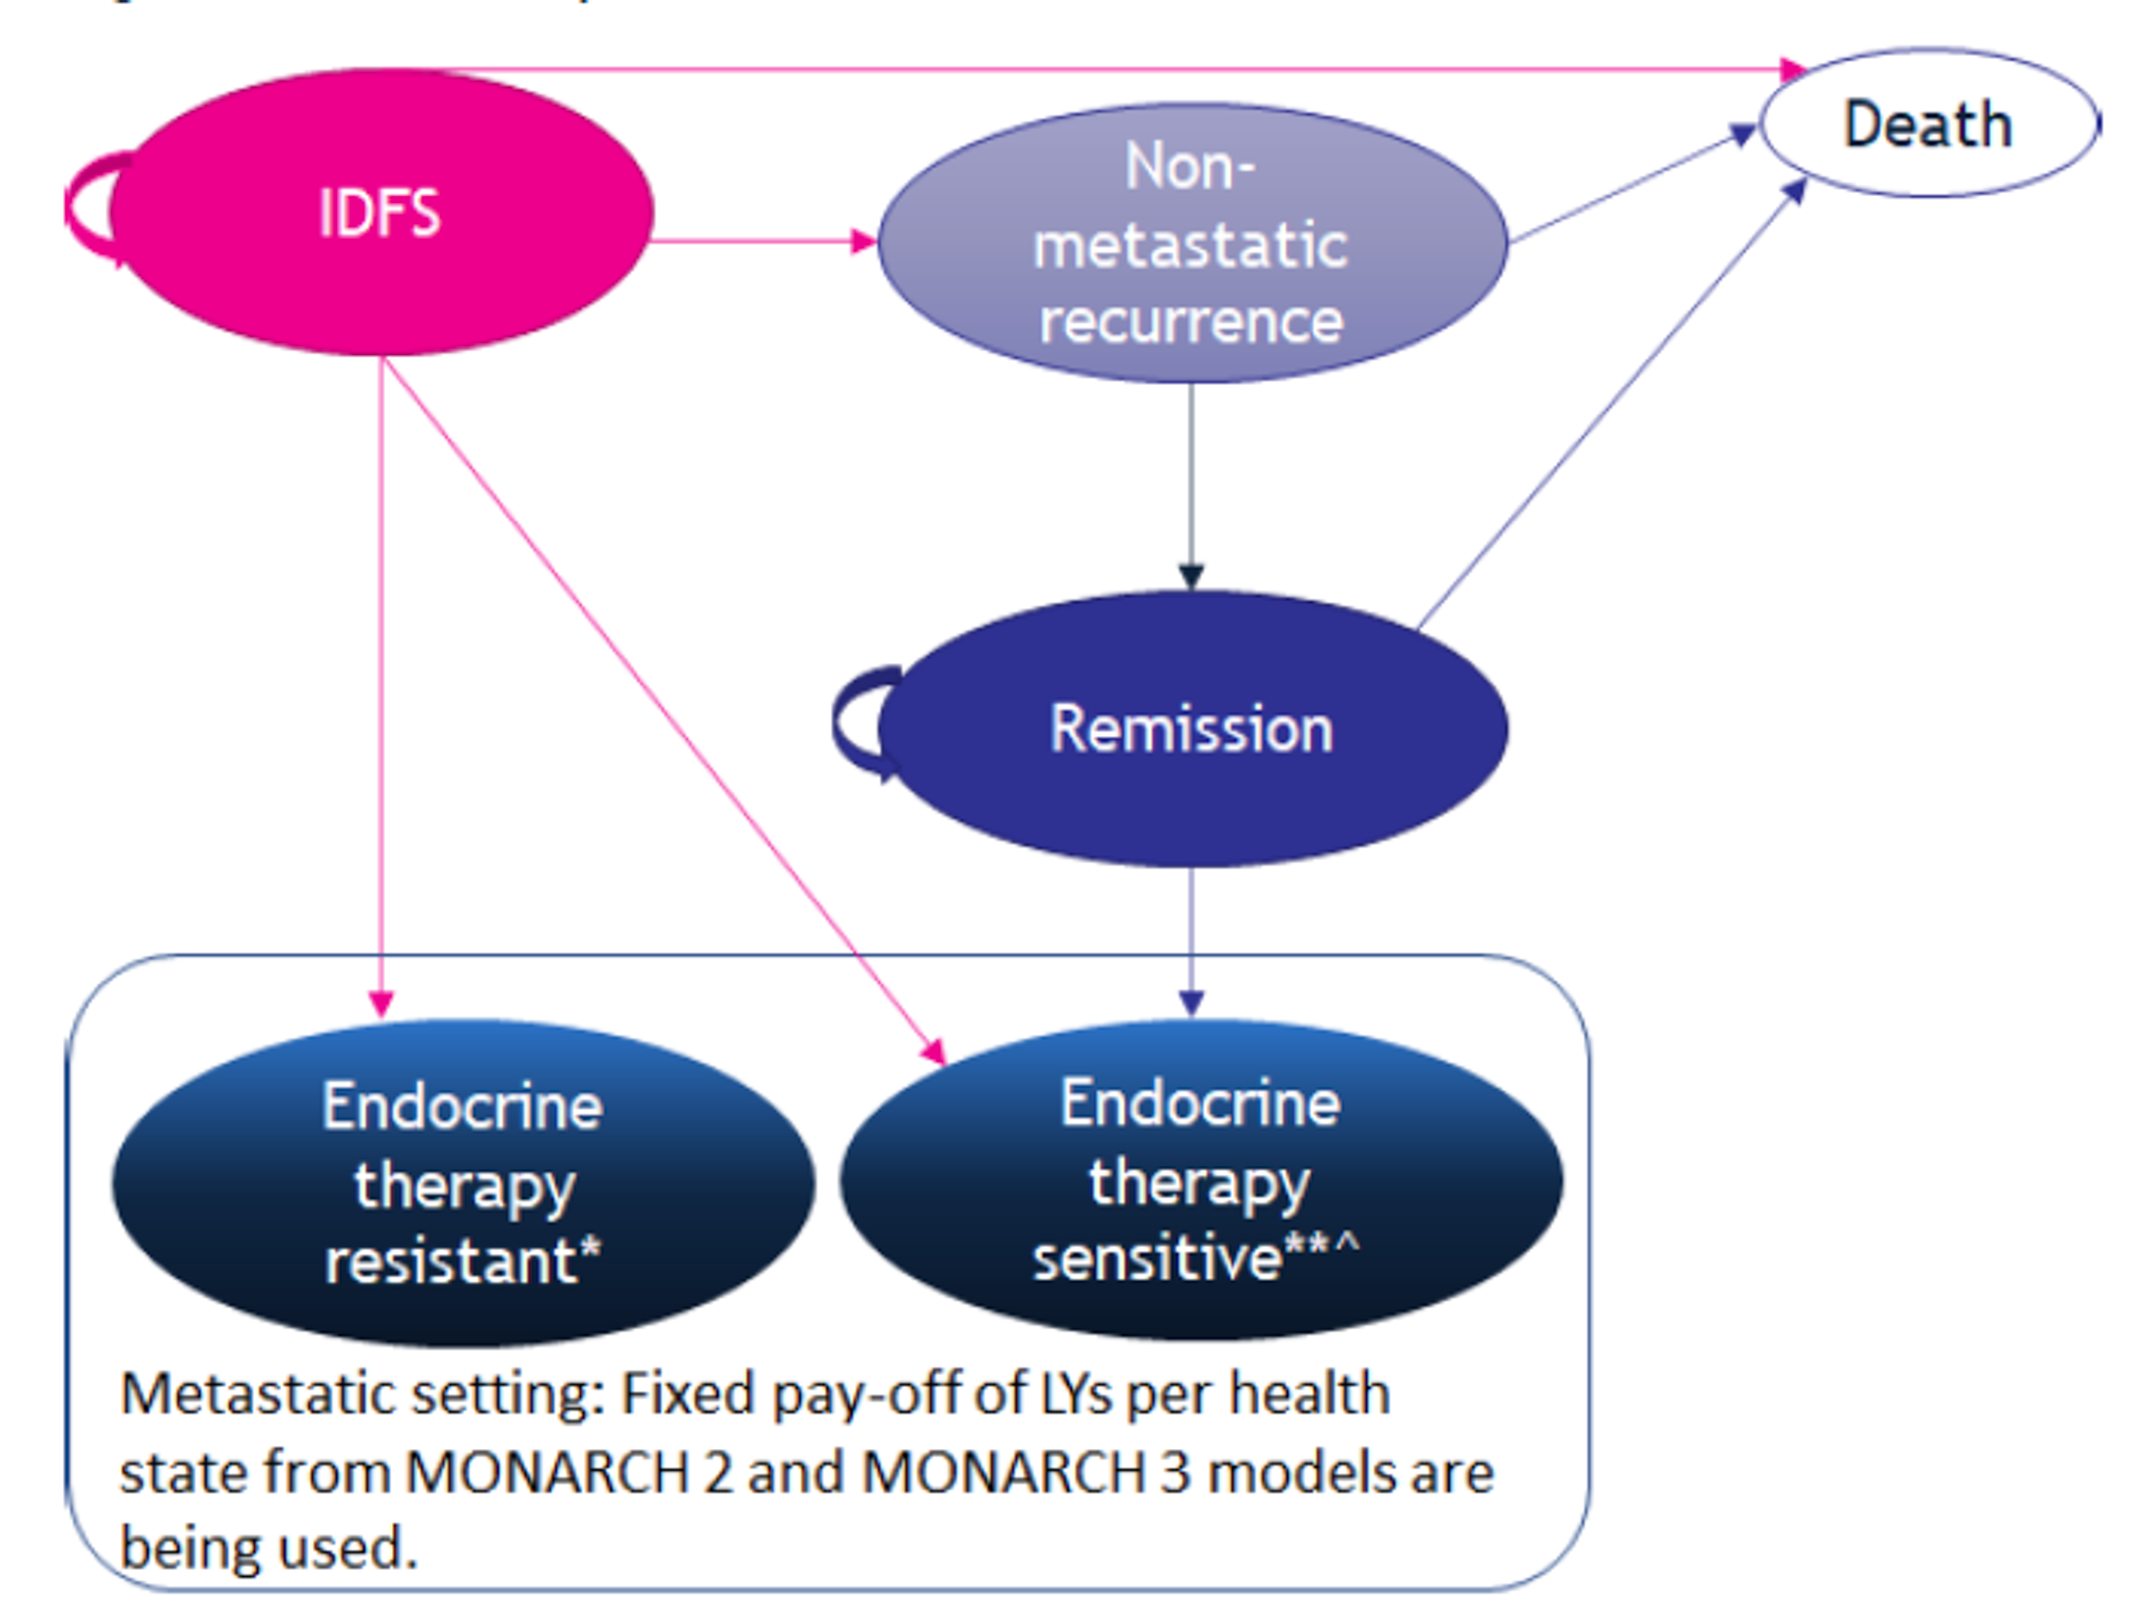 A diagram of a decision model with states IDFS, non-metastatic recurrence, remission, and 2 states endocrine therapy resistant and endocrine therapy sensitive within a box labelled “Metastatic setting: fixed payoff of LYs per health state from MONARCH 2 and MONARCH 3 are being used.” Arrows describe transitions between states as well as between all states and a state labelled “death.”